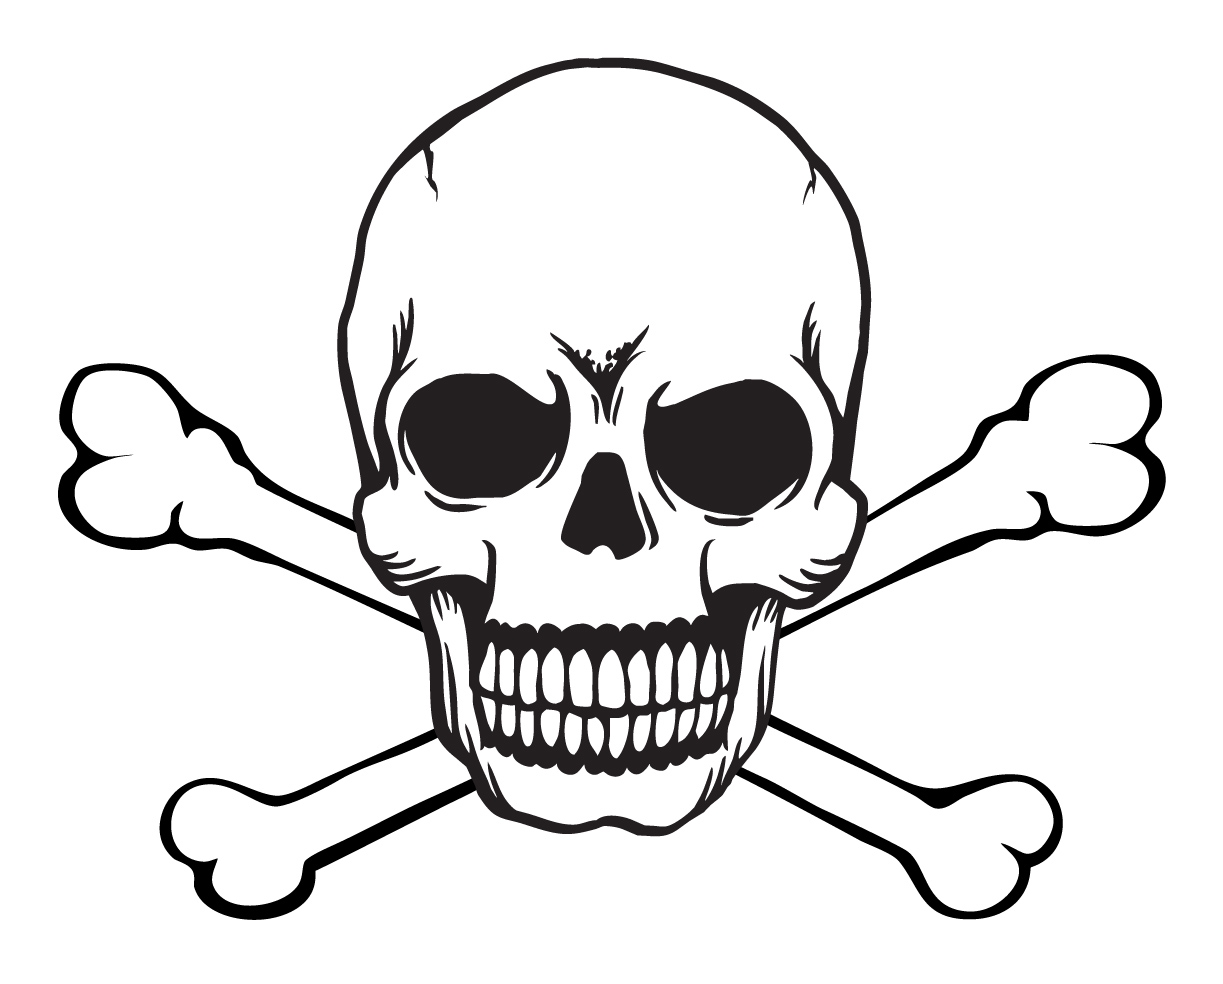 skull and crossbones pirate - Clip Art Library.